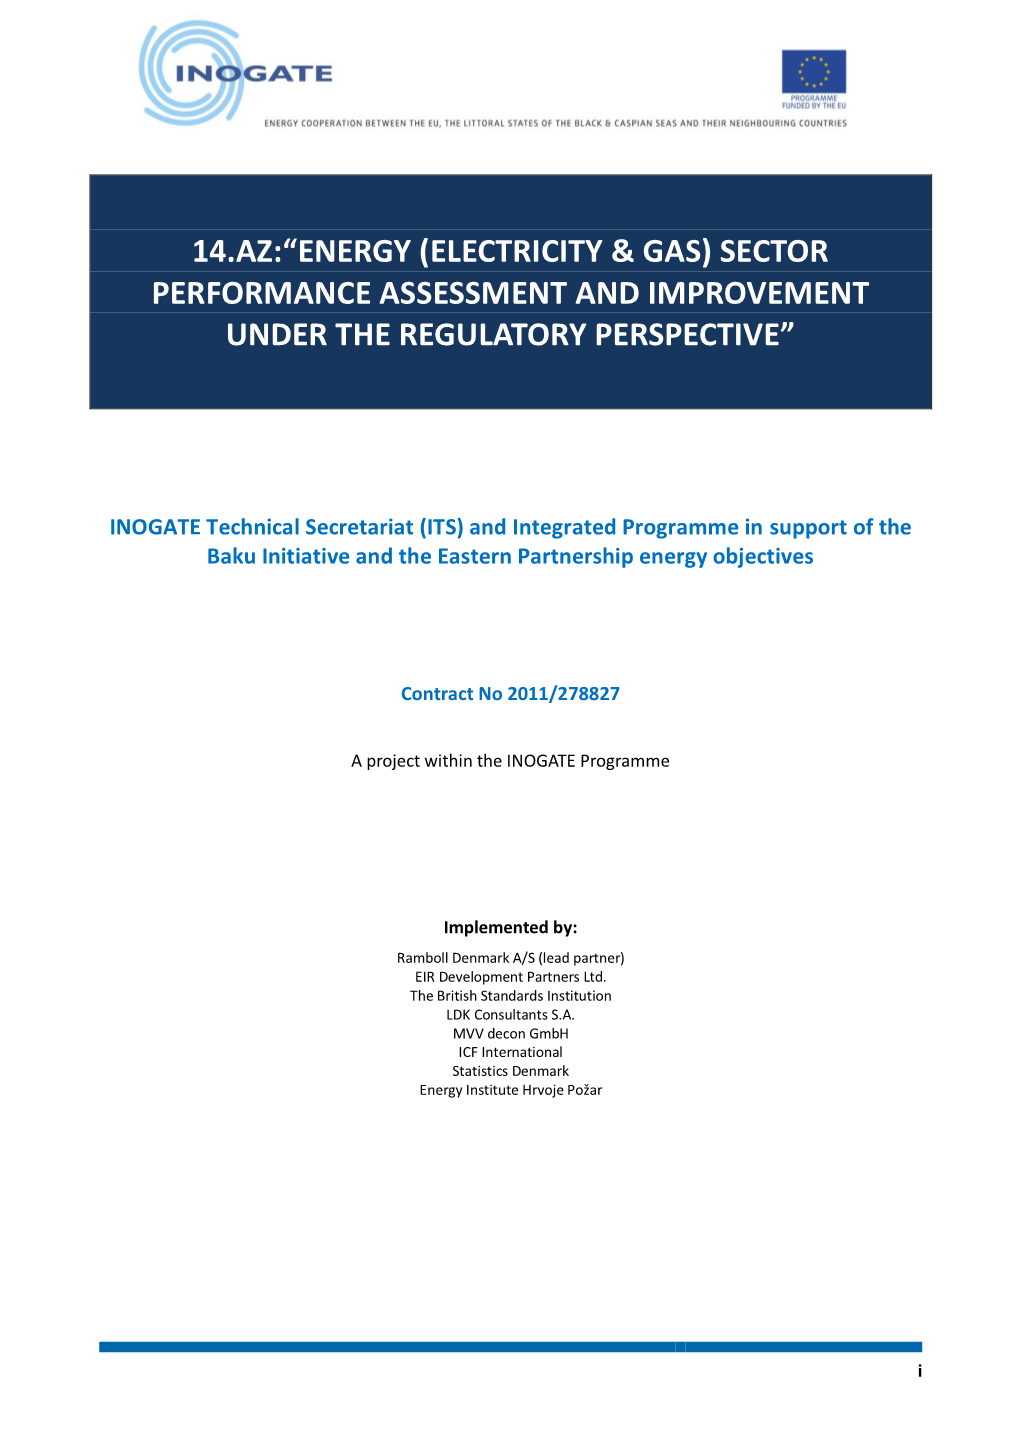 14.Az:“Energy (Electricity & Gas) Sector Performance Assessment And